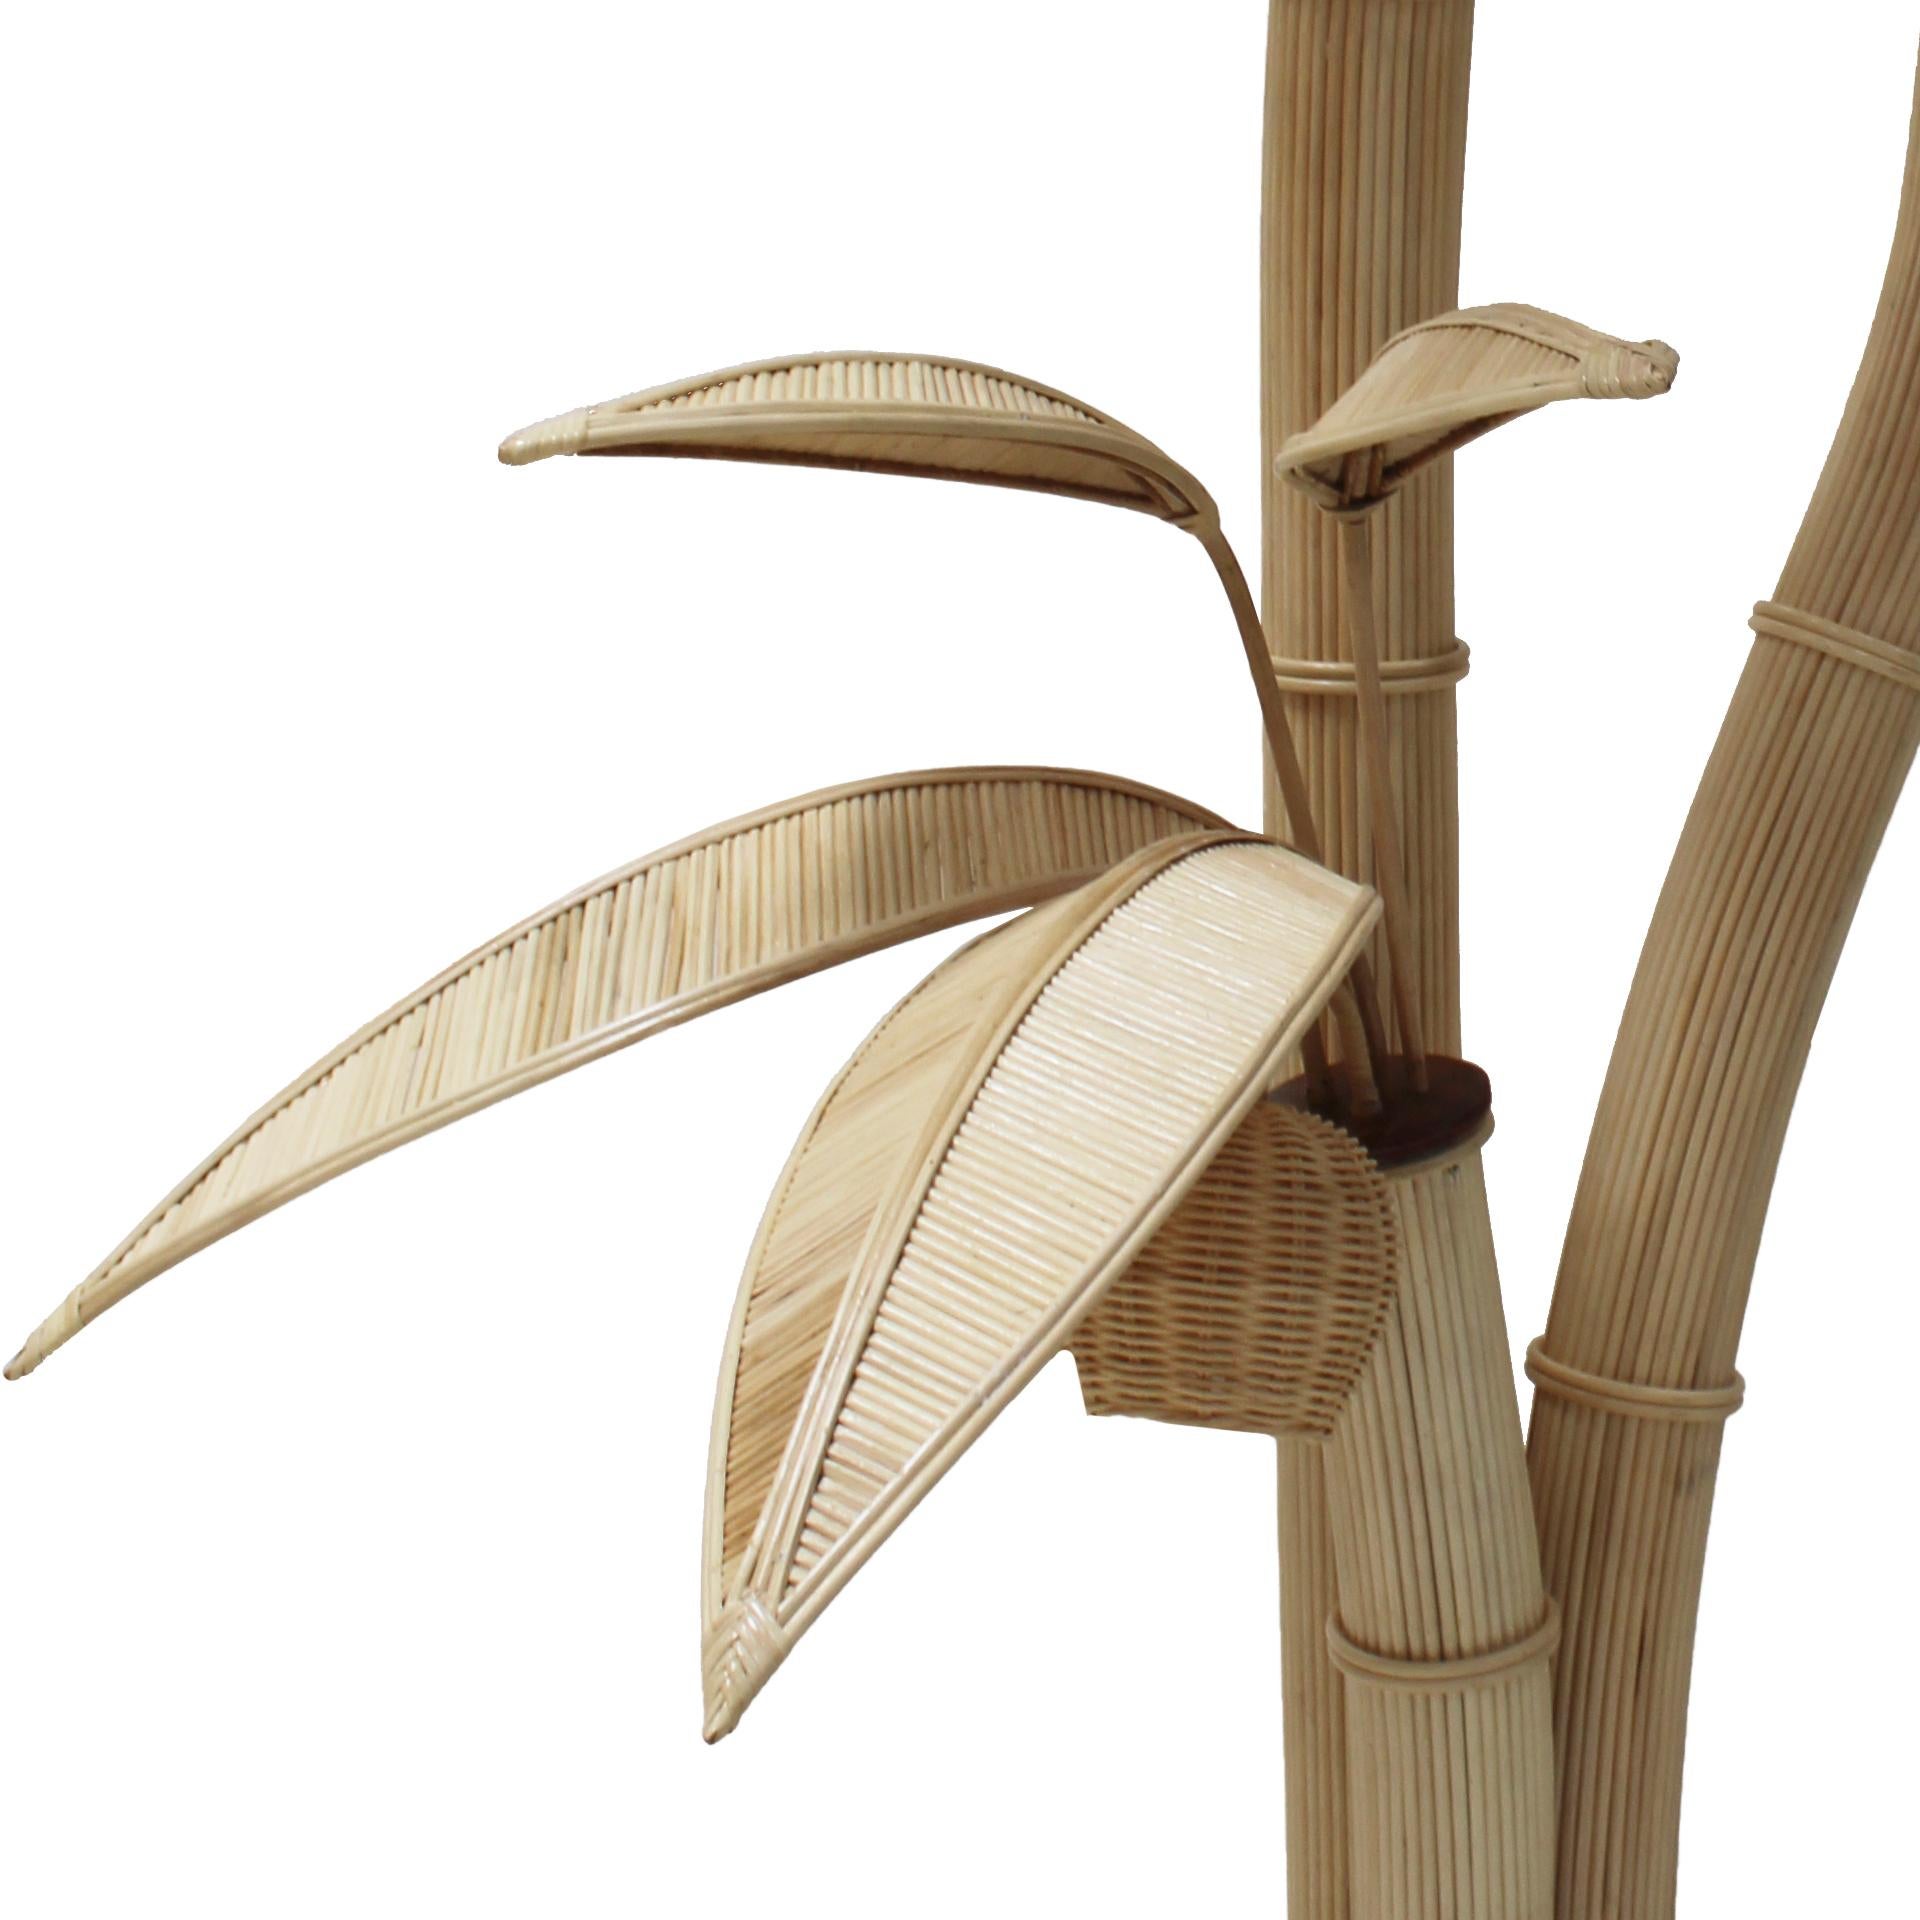 This floor lamp, originating from Italy in the 1980s, showcases an elegant blend of materials and nature-inspired design. Crafted from bamboo and braided rattan, the lamp takes on the form of a palm tree. Standing tall, it brings a touch of tropical